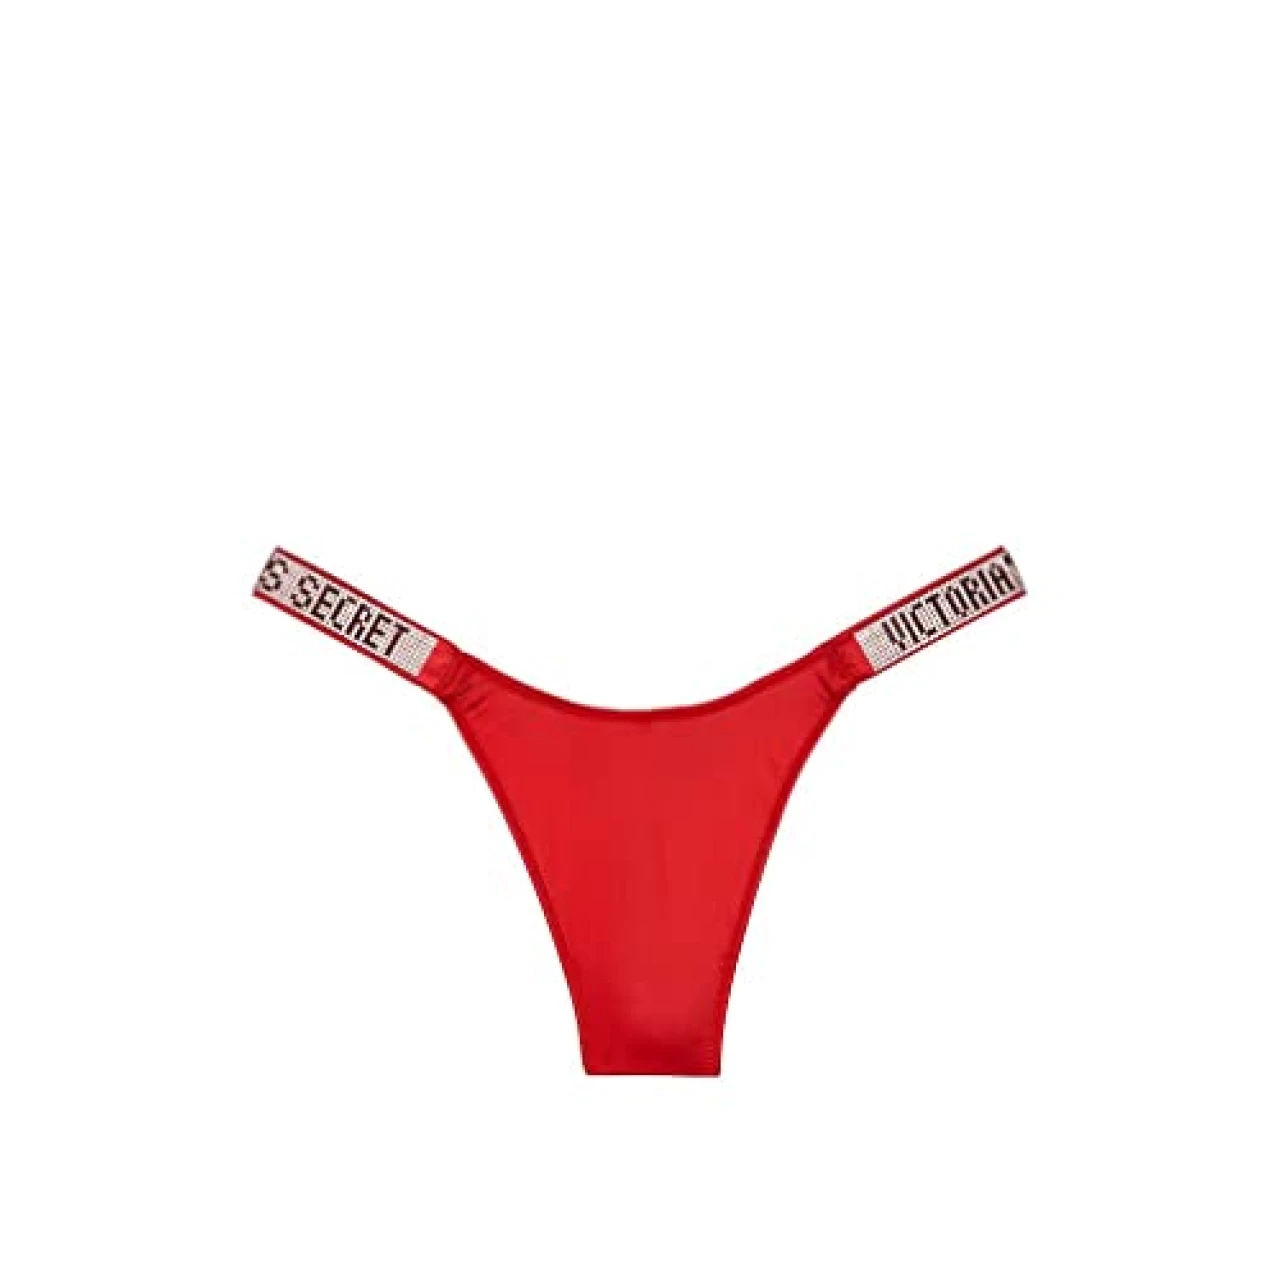 Victoria&rsquo;s Secret Women&rsquo;s Thong Underwear, Women&rsquo;s Panties, Very Sexy Collection Lipstick Red (XS)